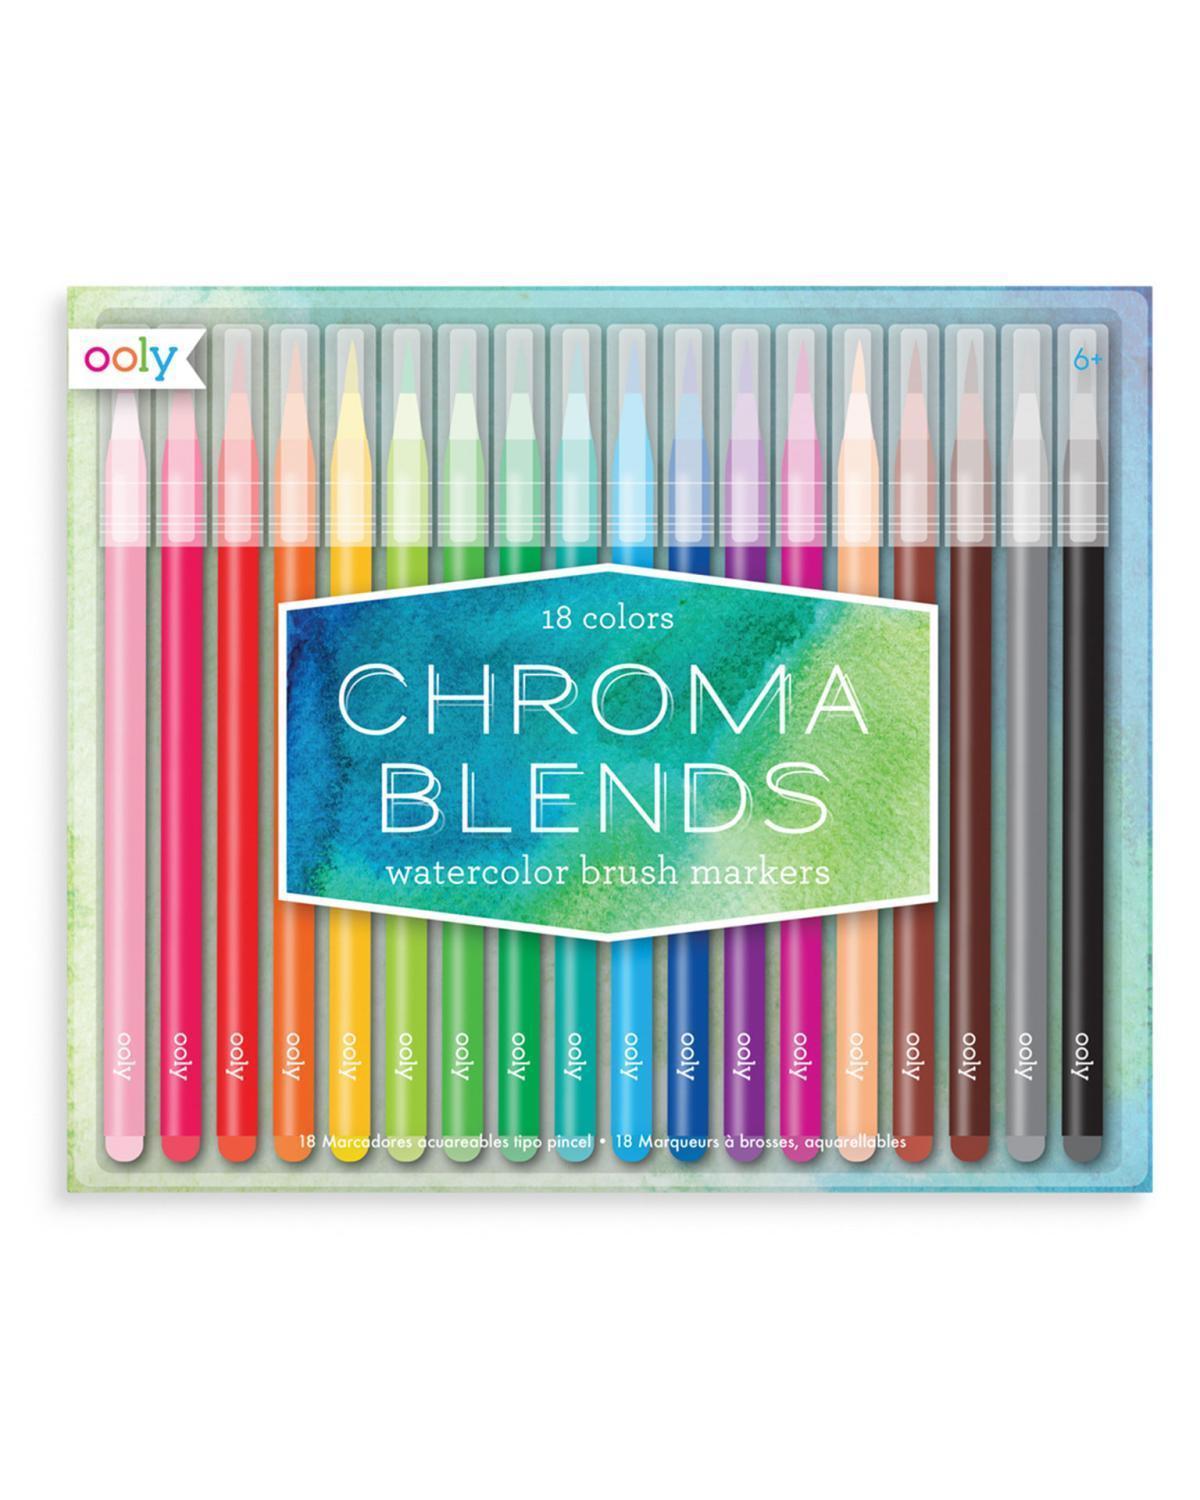 Little ooly play chroma blends watercolor markers